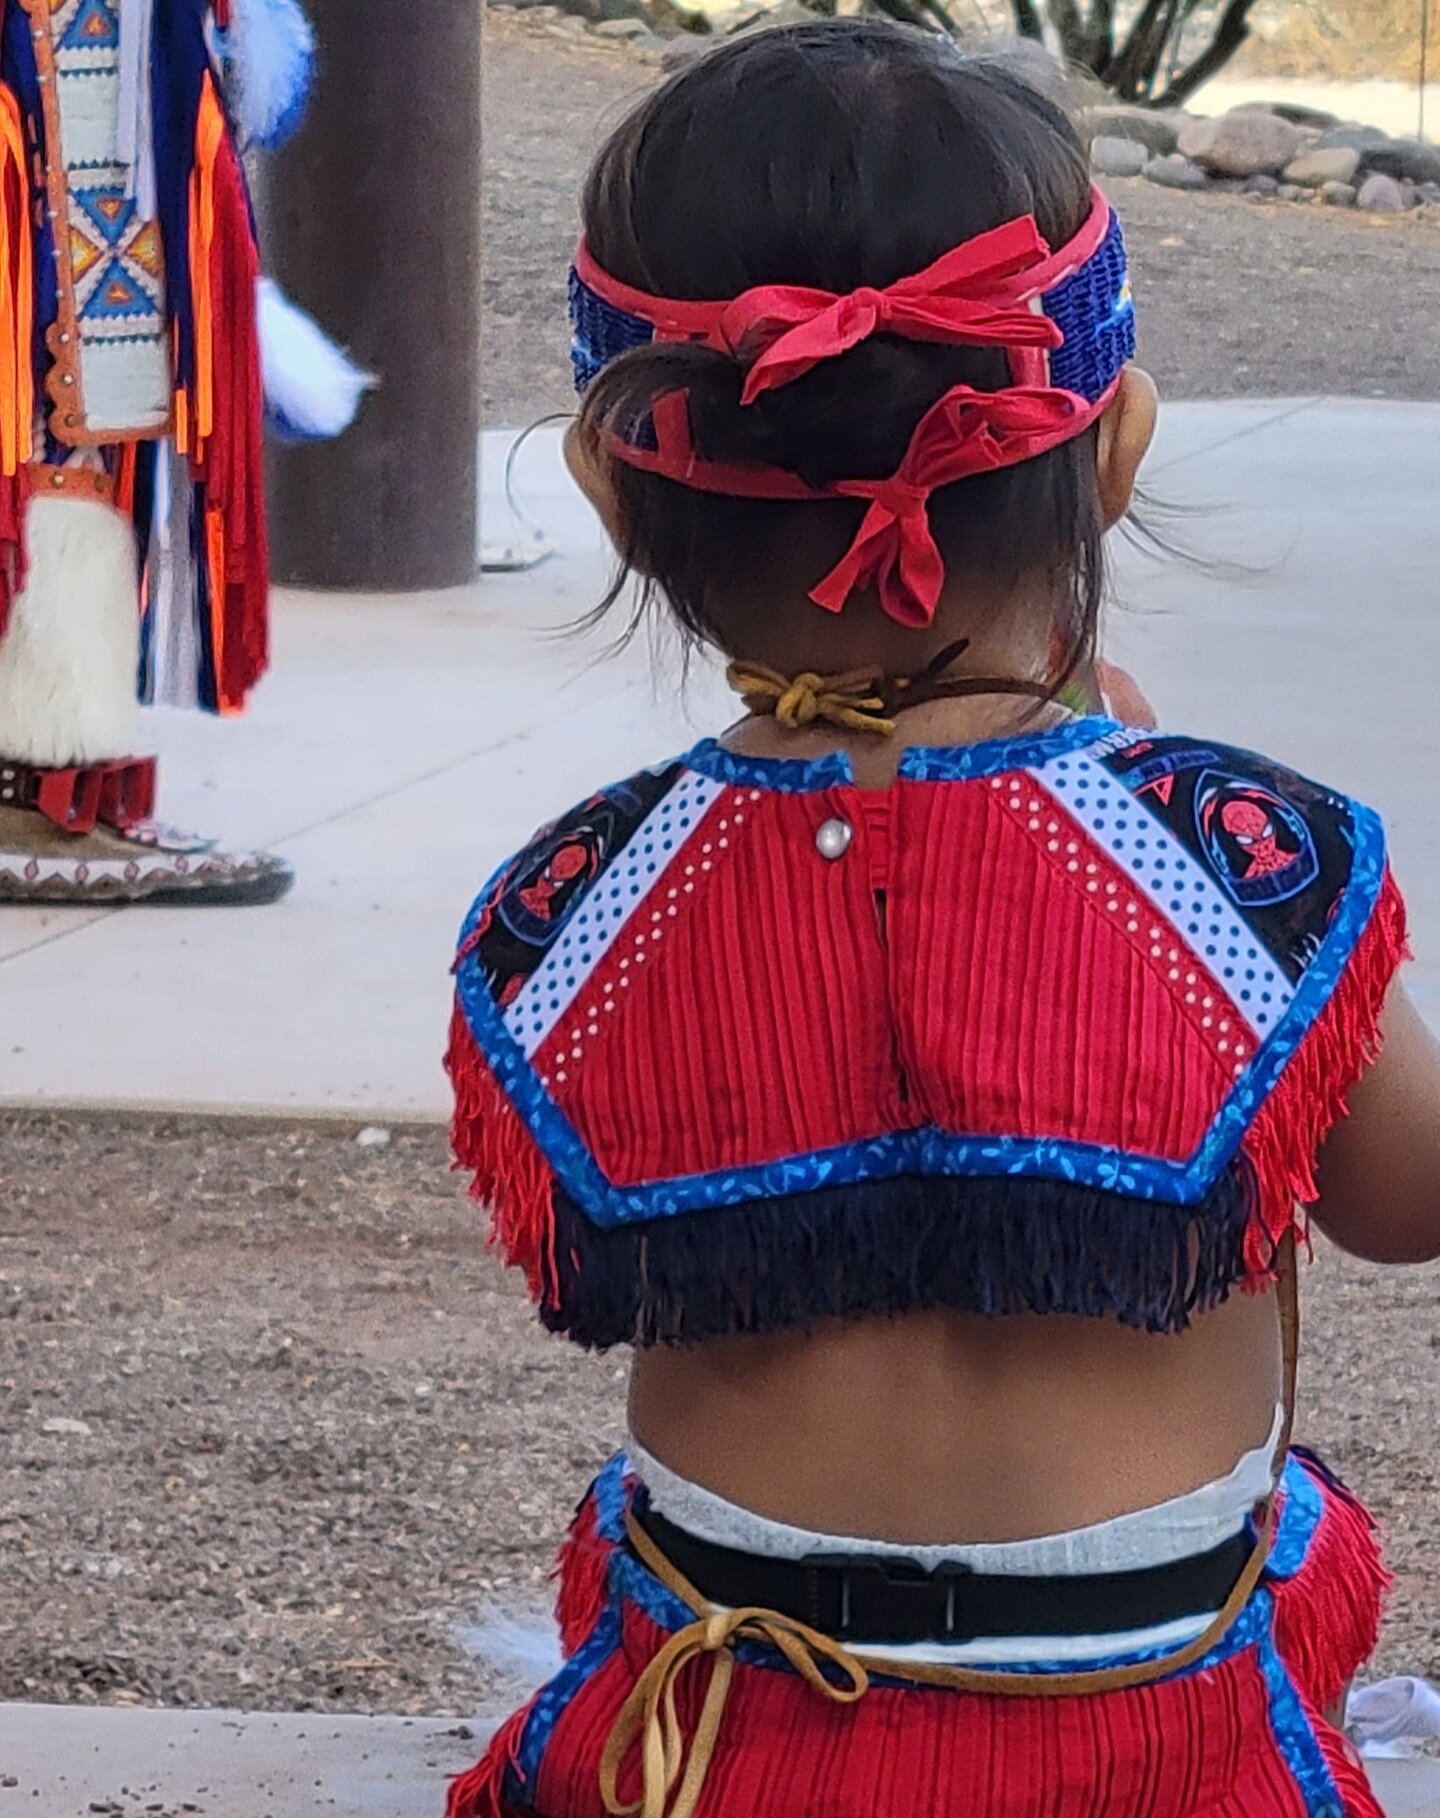 Congrats to @libertywildlifeaz on a successful first annual Native American Culture and Wildlife Celebration! 
Native Americans have maintained a special connection with the animals in their natural world, one that has shaped and sustained their cult